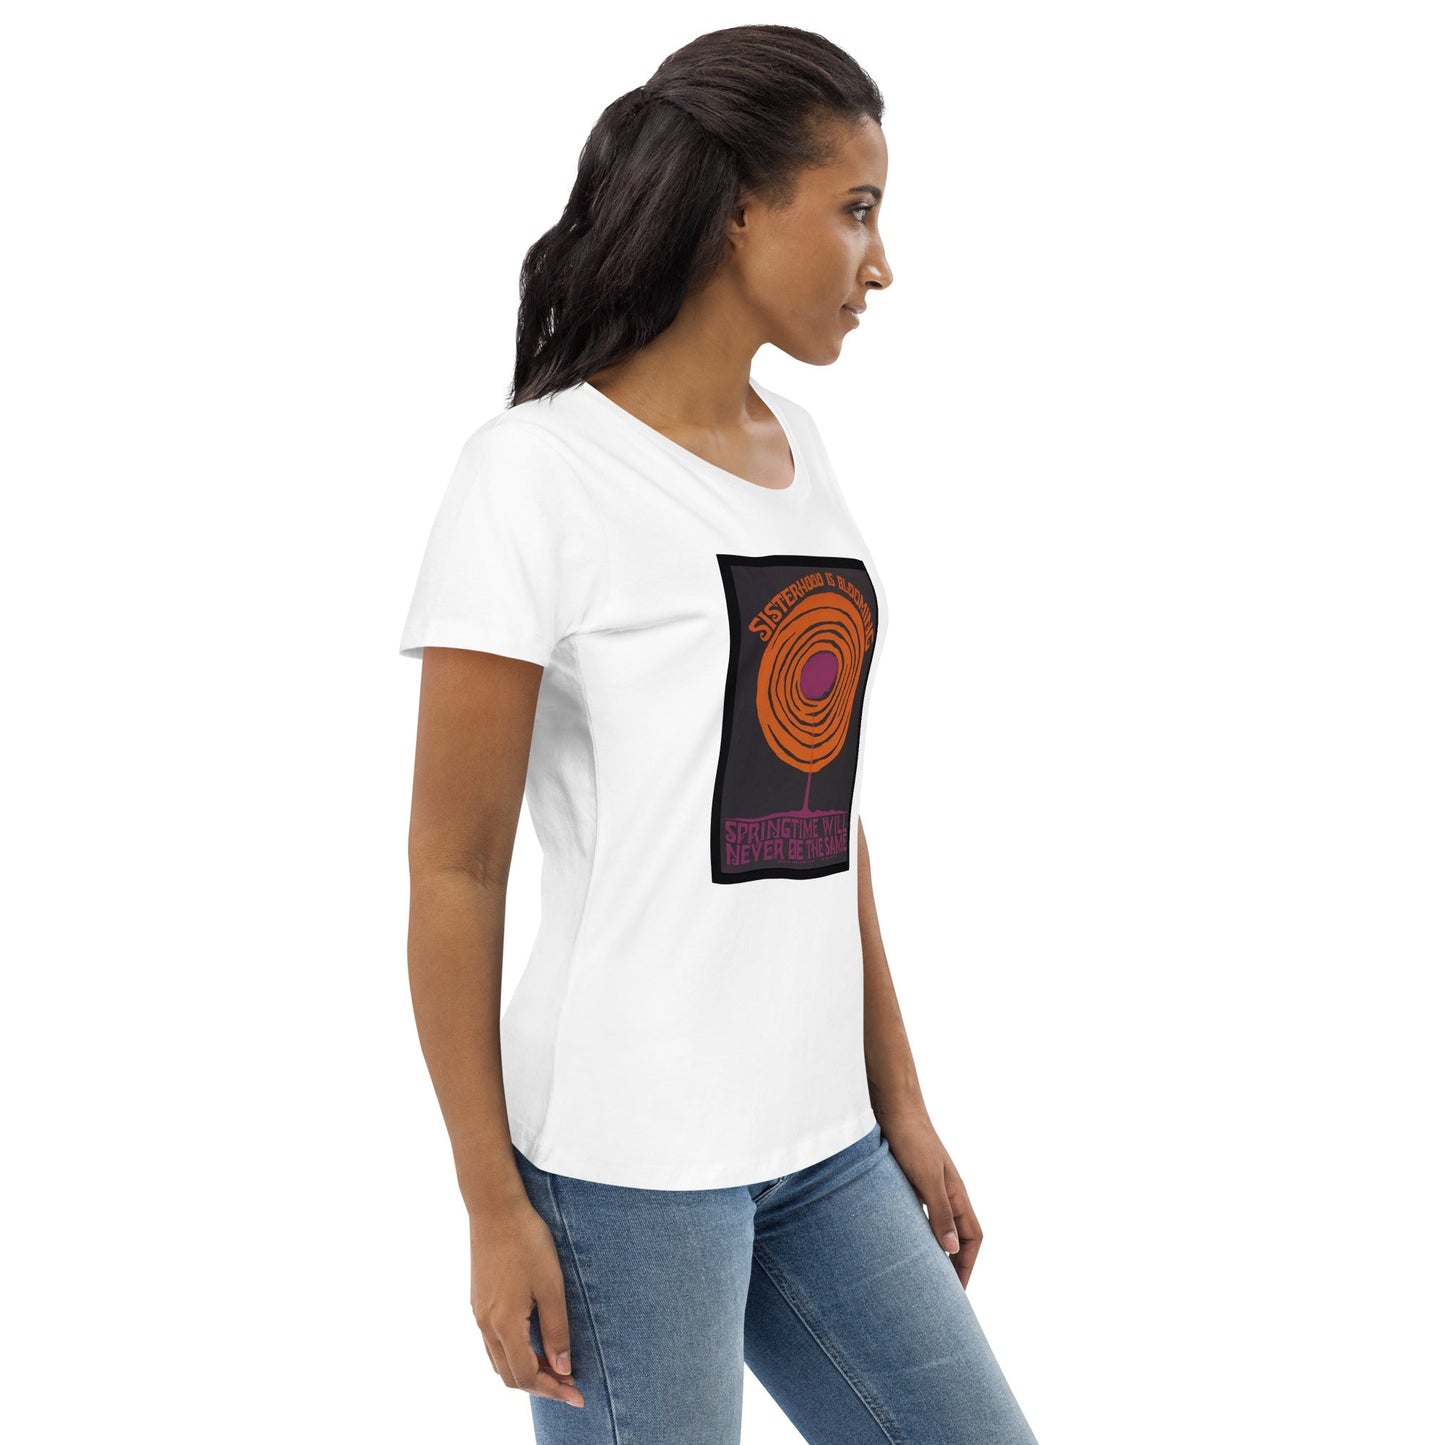 Sisterhood - Women's fitted eco tee - Souled Out World